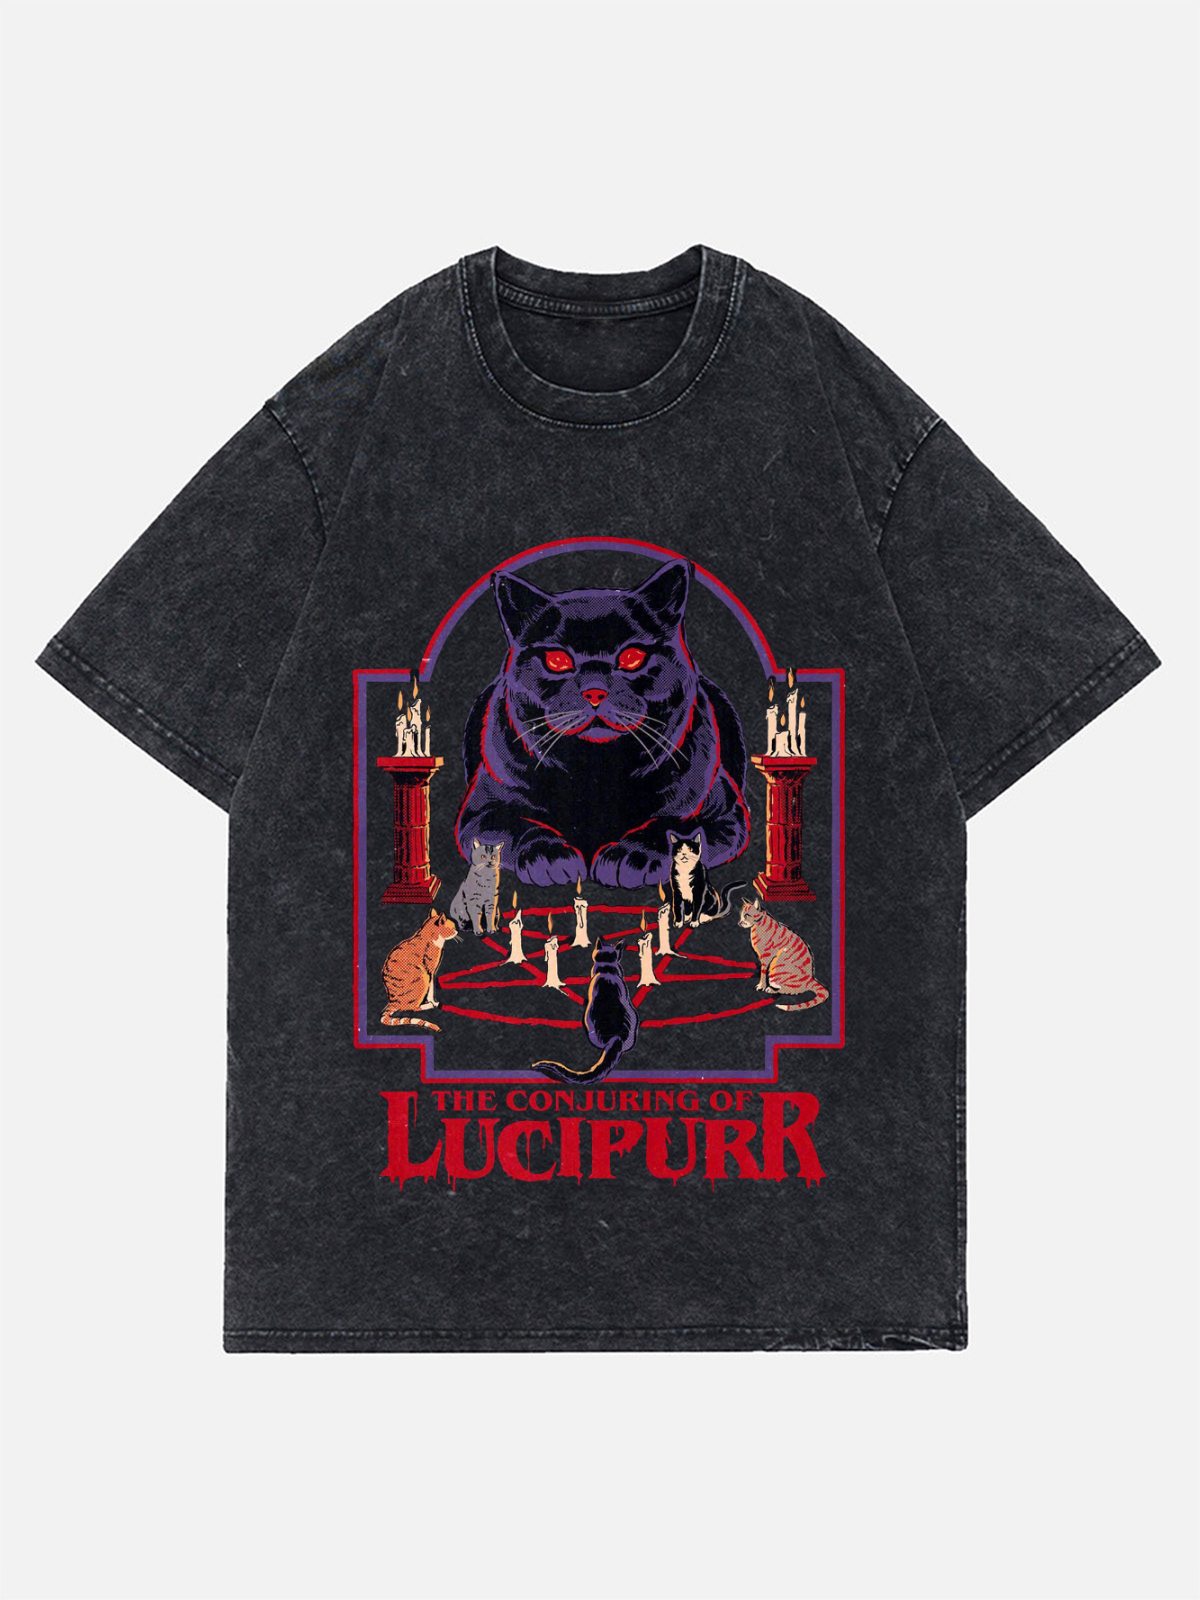 The Conjuring of Lucipurr Wash Denim T-Shirt